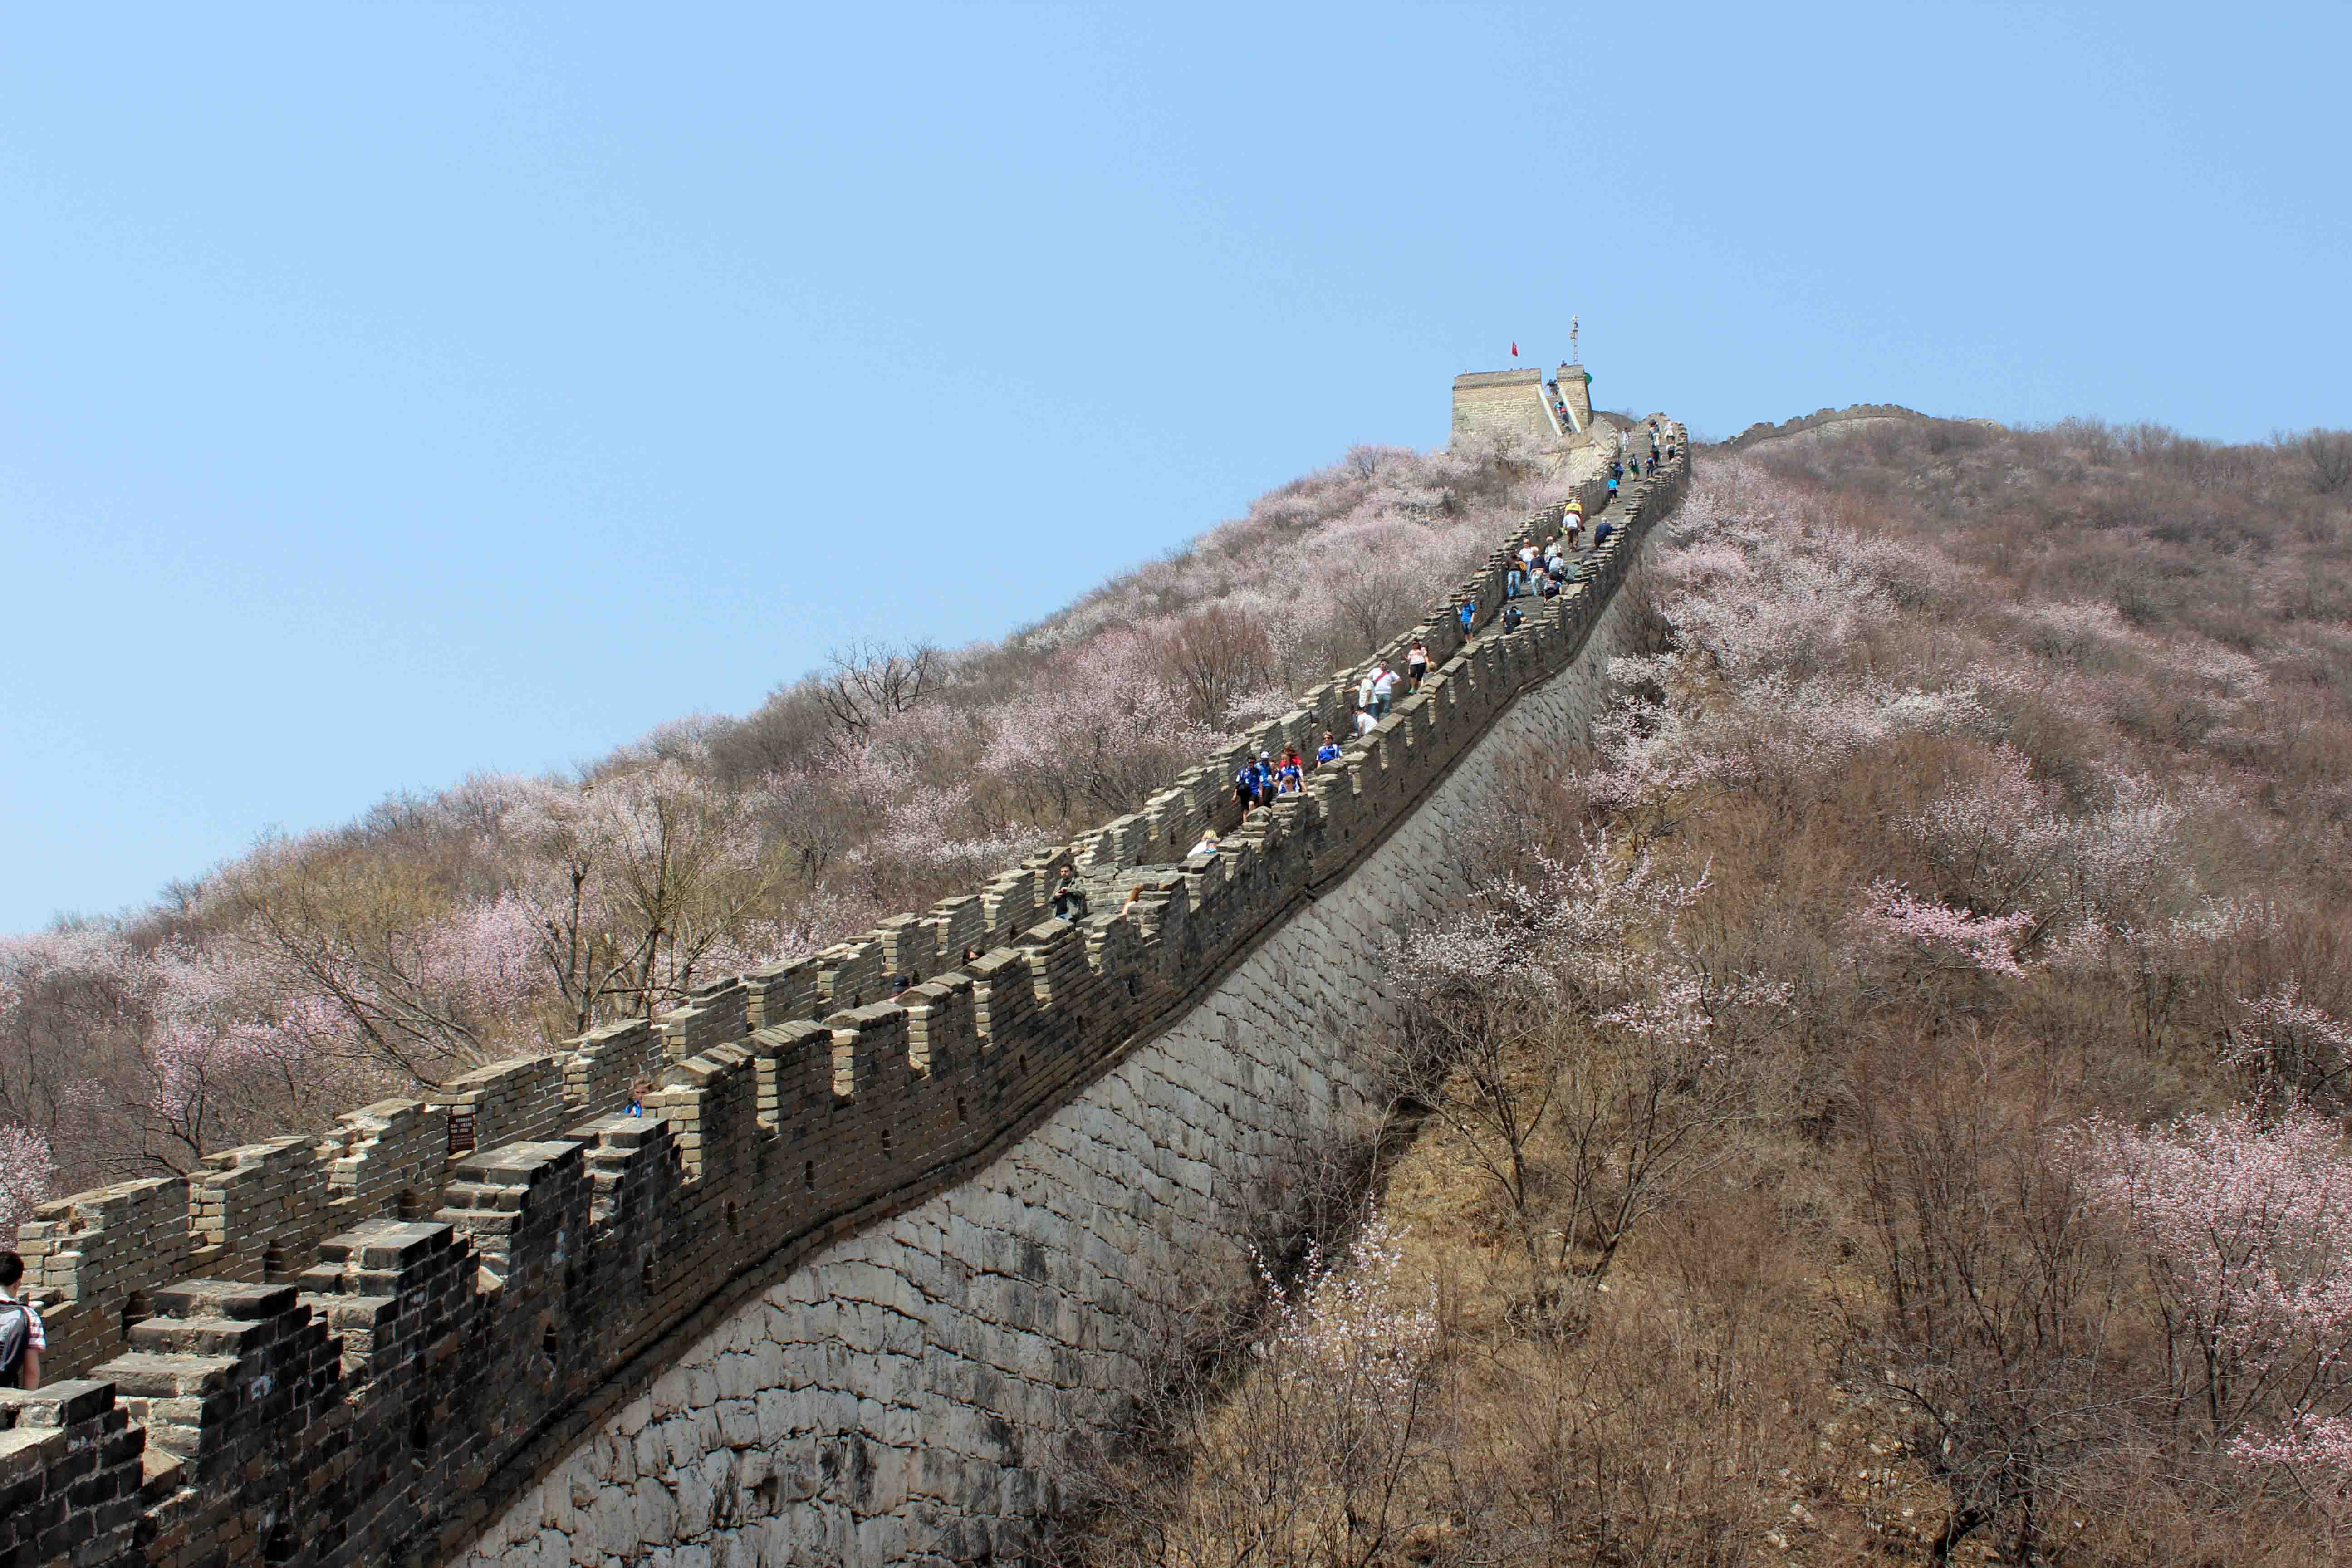 The part between Tower 20 and Tower 22 is the steepest part of Mutianyu